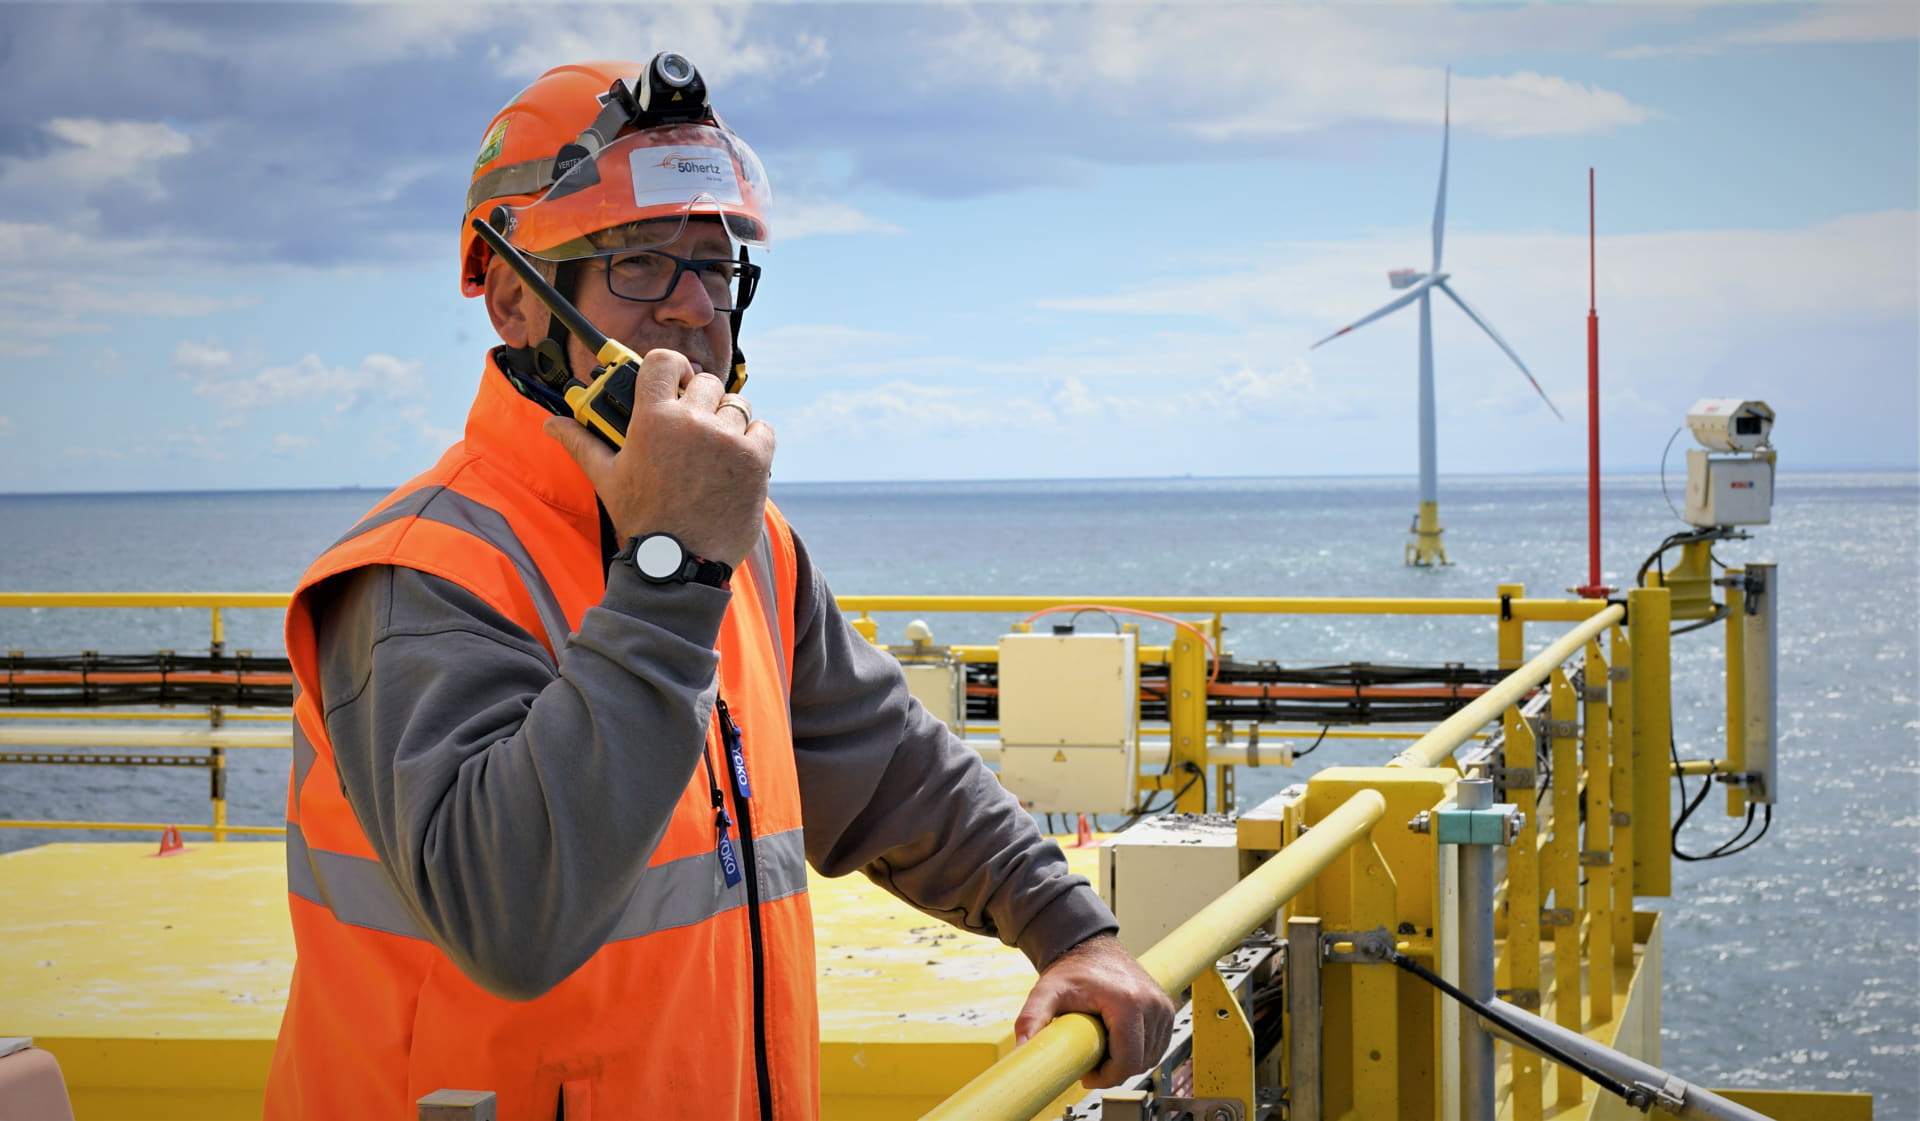 A photo of an Energinet employee at the now-operational Krieger Flak project